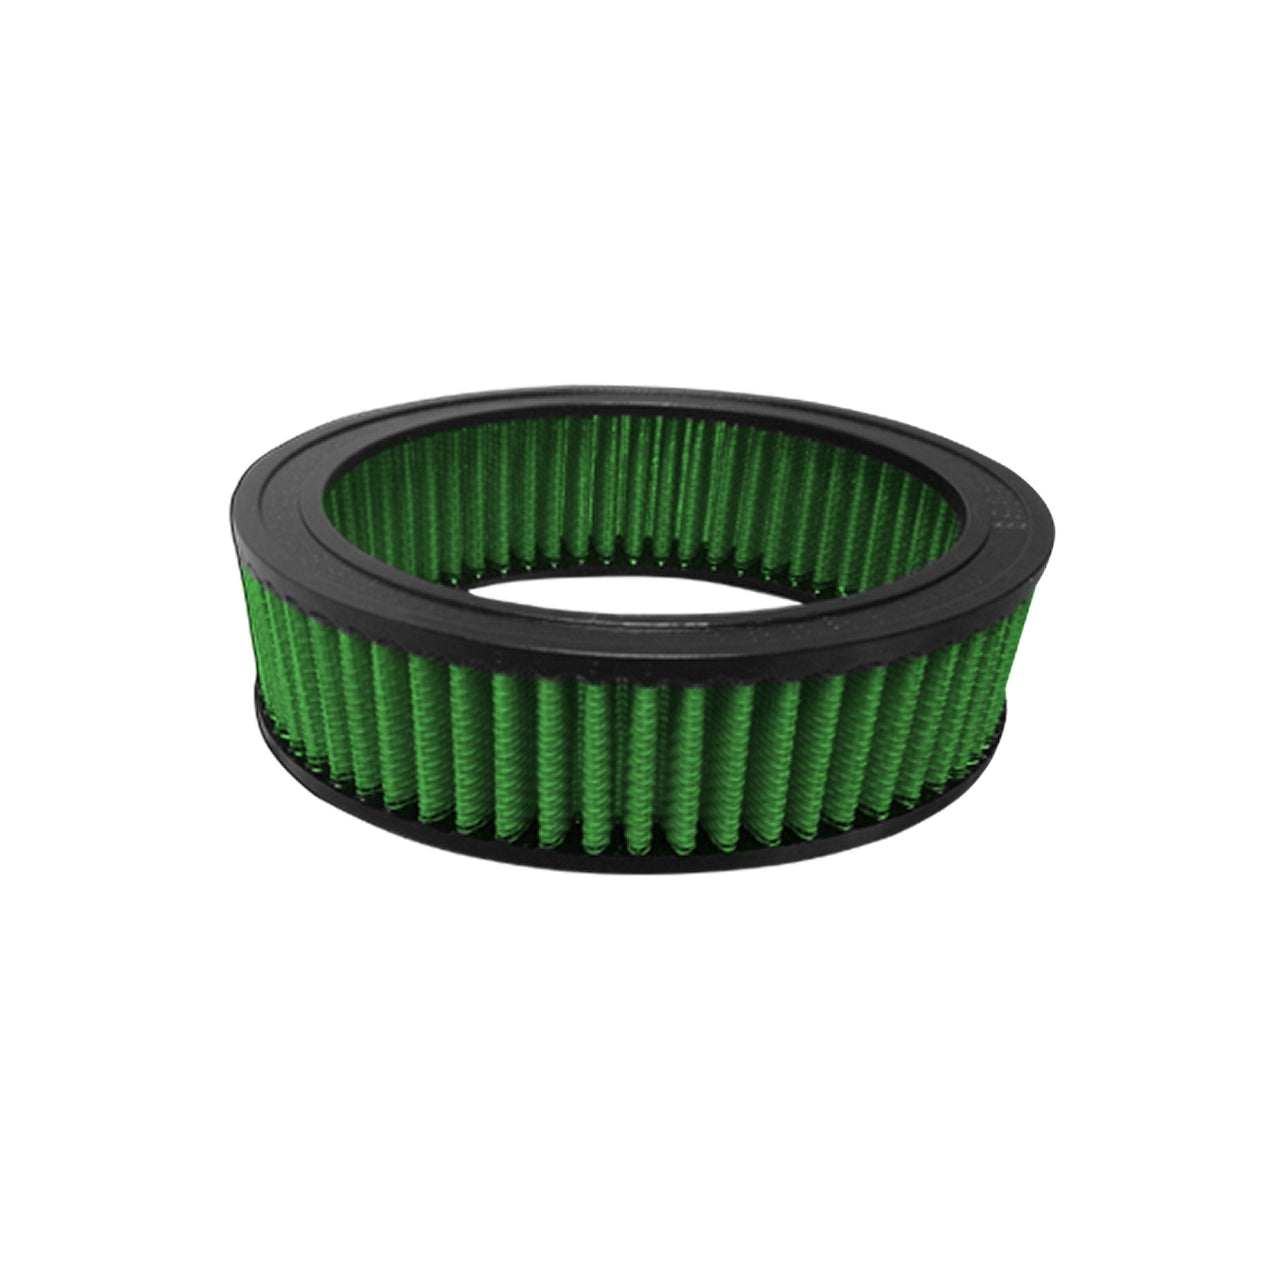 Green Filter Hyper Charger Kuryakn Round Filter - OD 5in. / ID 4in. / H 1.875in.